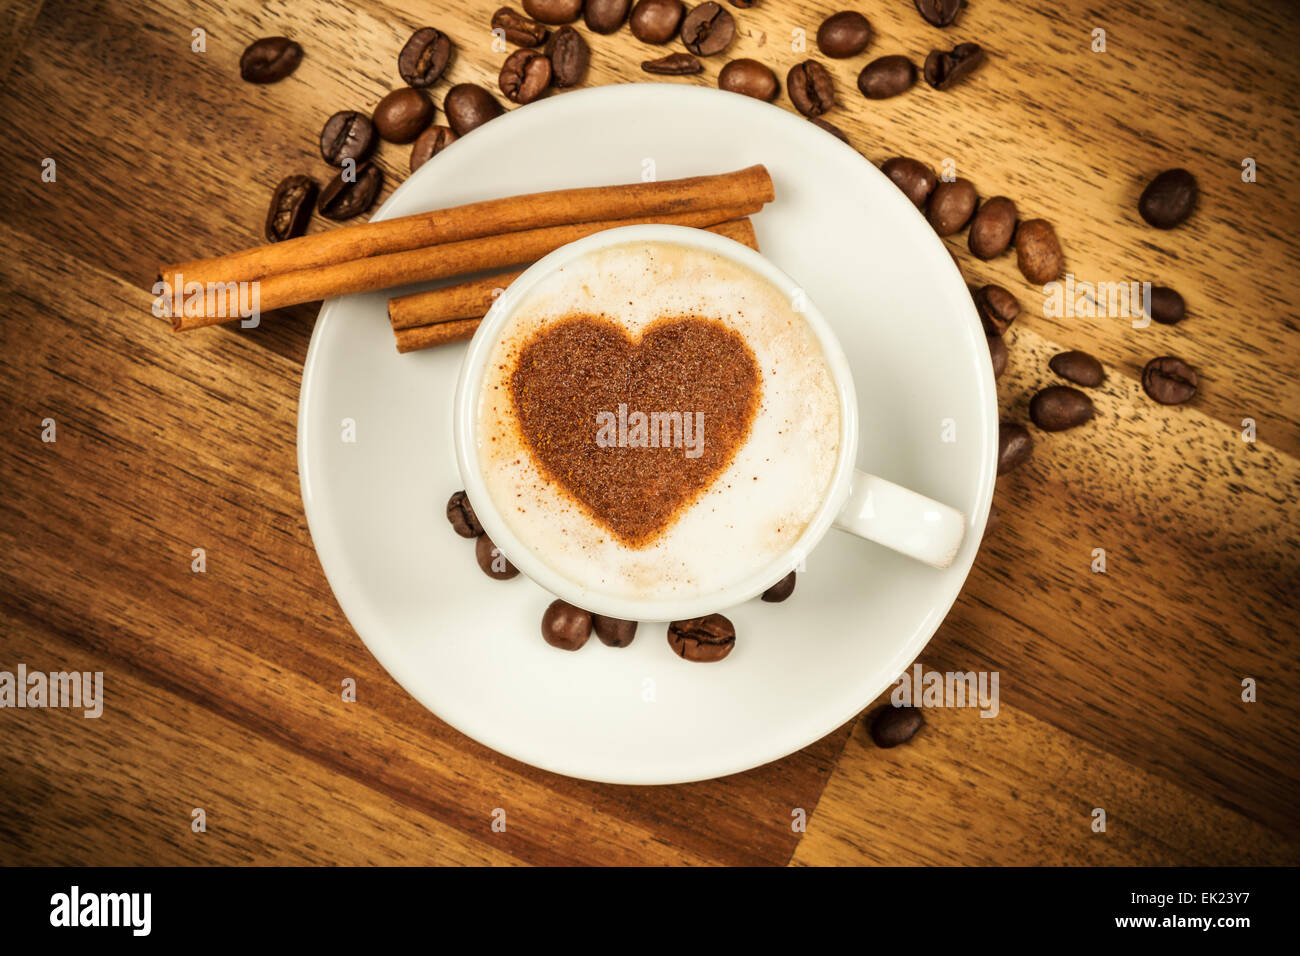 Cup of coffee with heart shape on foam served in porcelain saucer on wooden table. Shot from aerial view Stock Photo